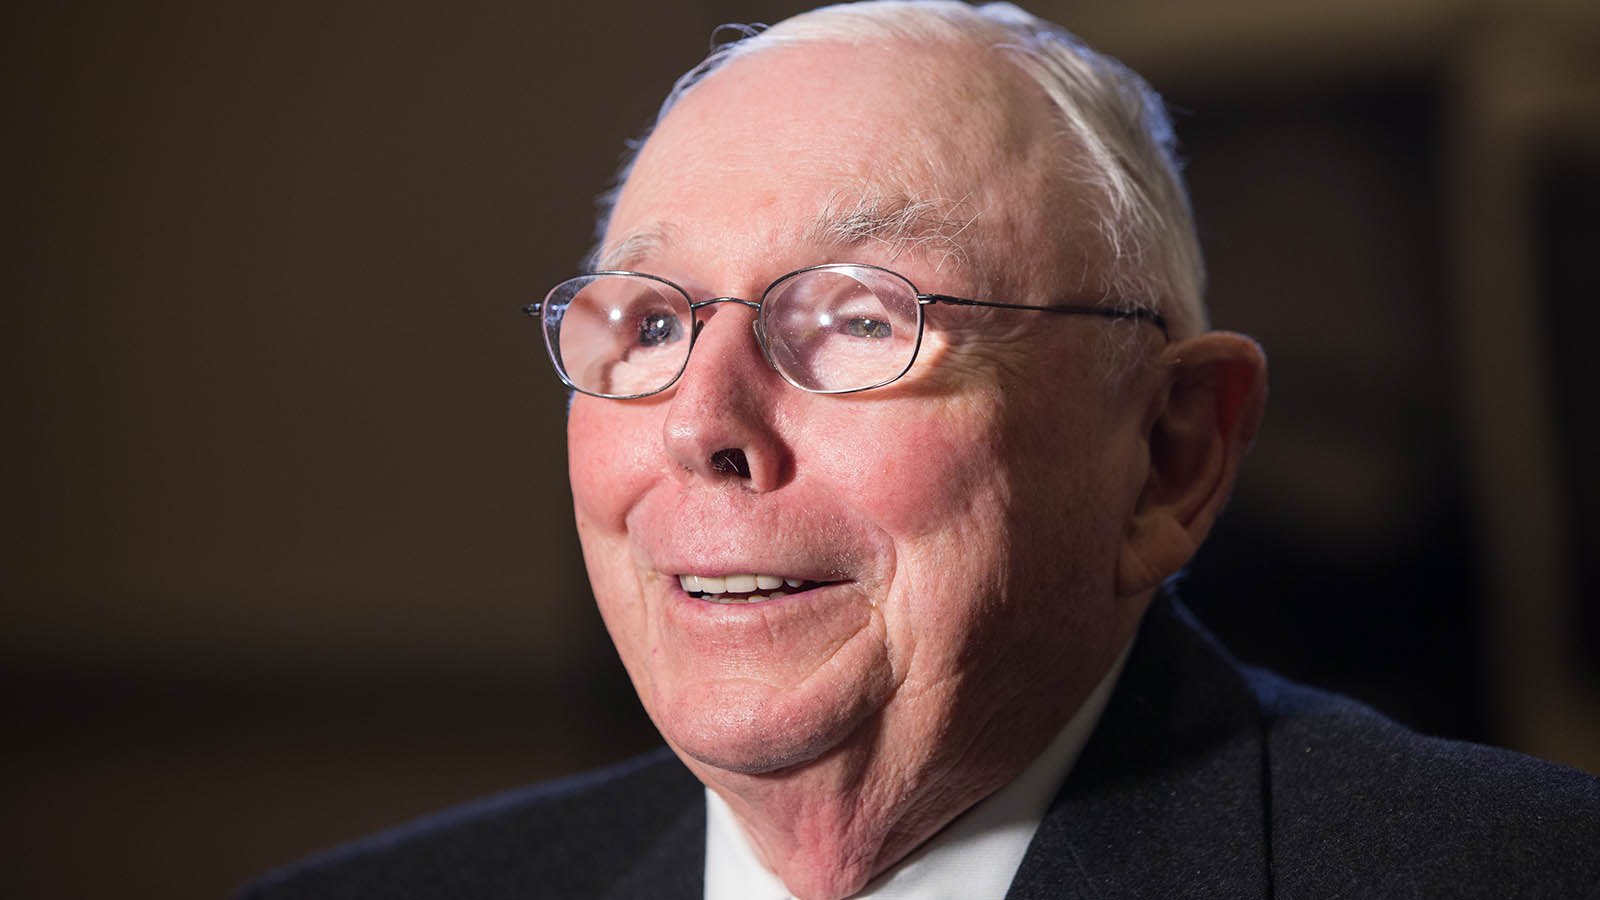 3 Stocks Charlie Munger Believes Can Survive These Economic Headwinds